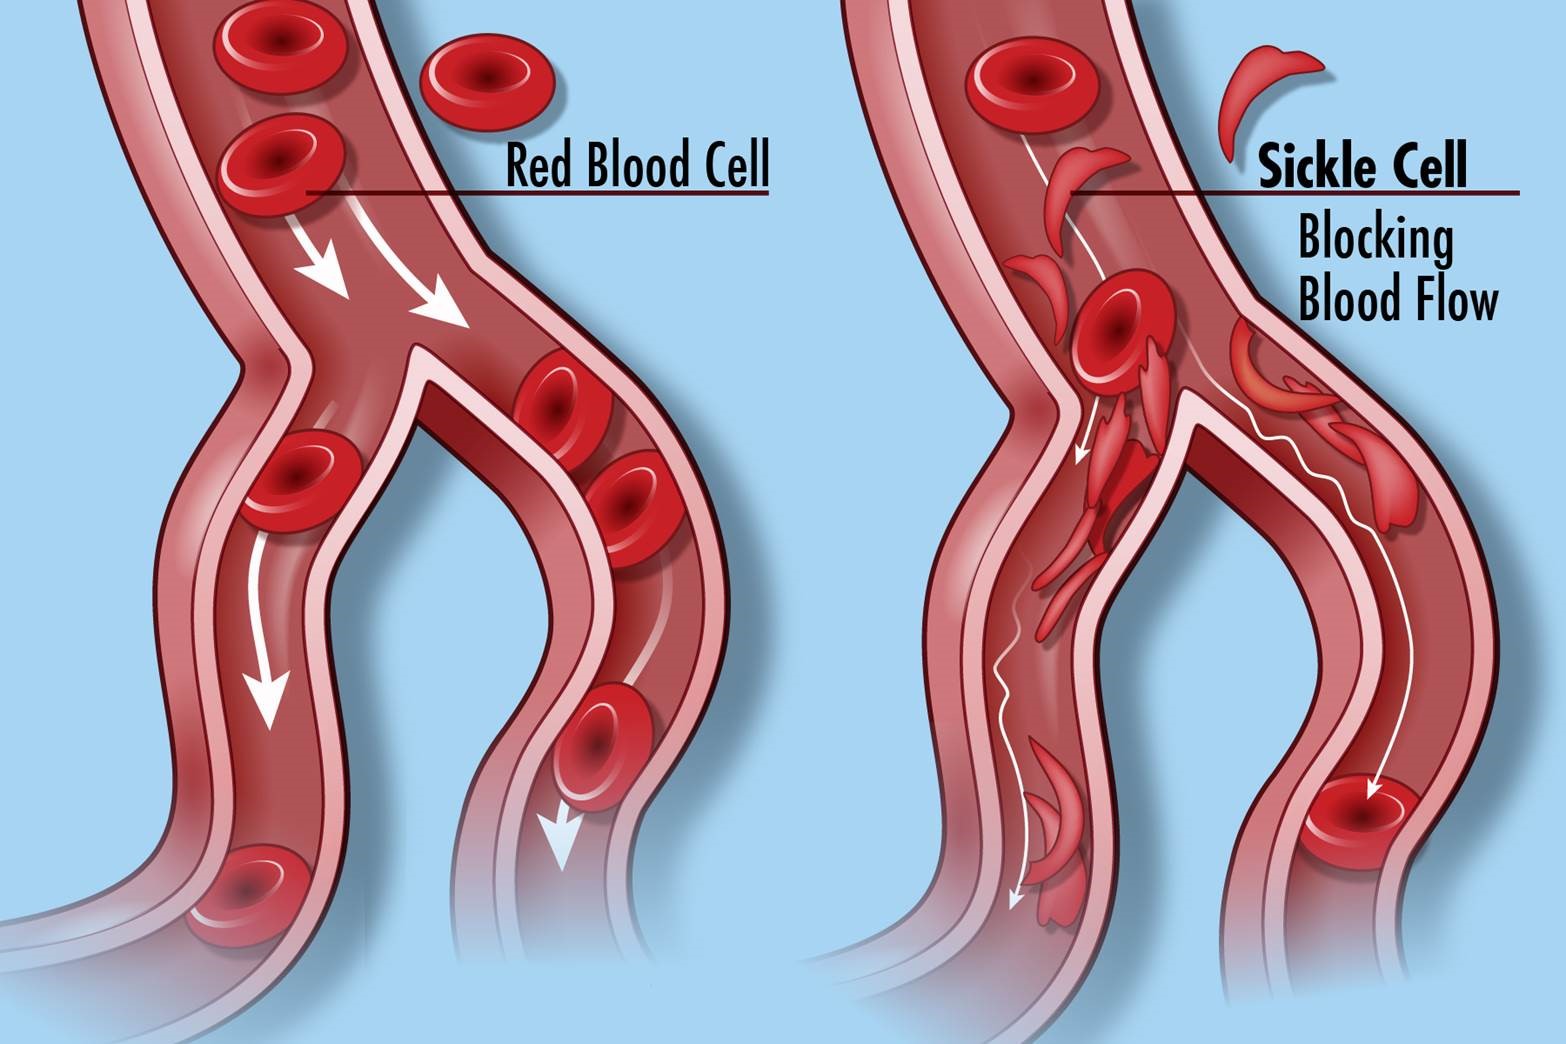 Schematic diagram of blood vessels comparing normal blood flow with round red blood cells and blocked blood flow in patient with sickle shaped red blood cells